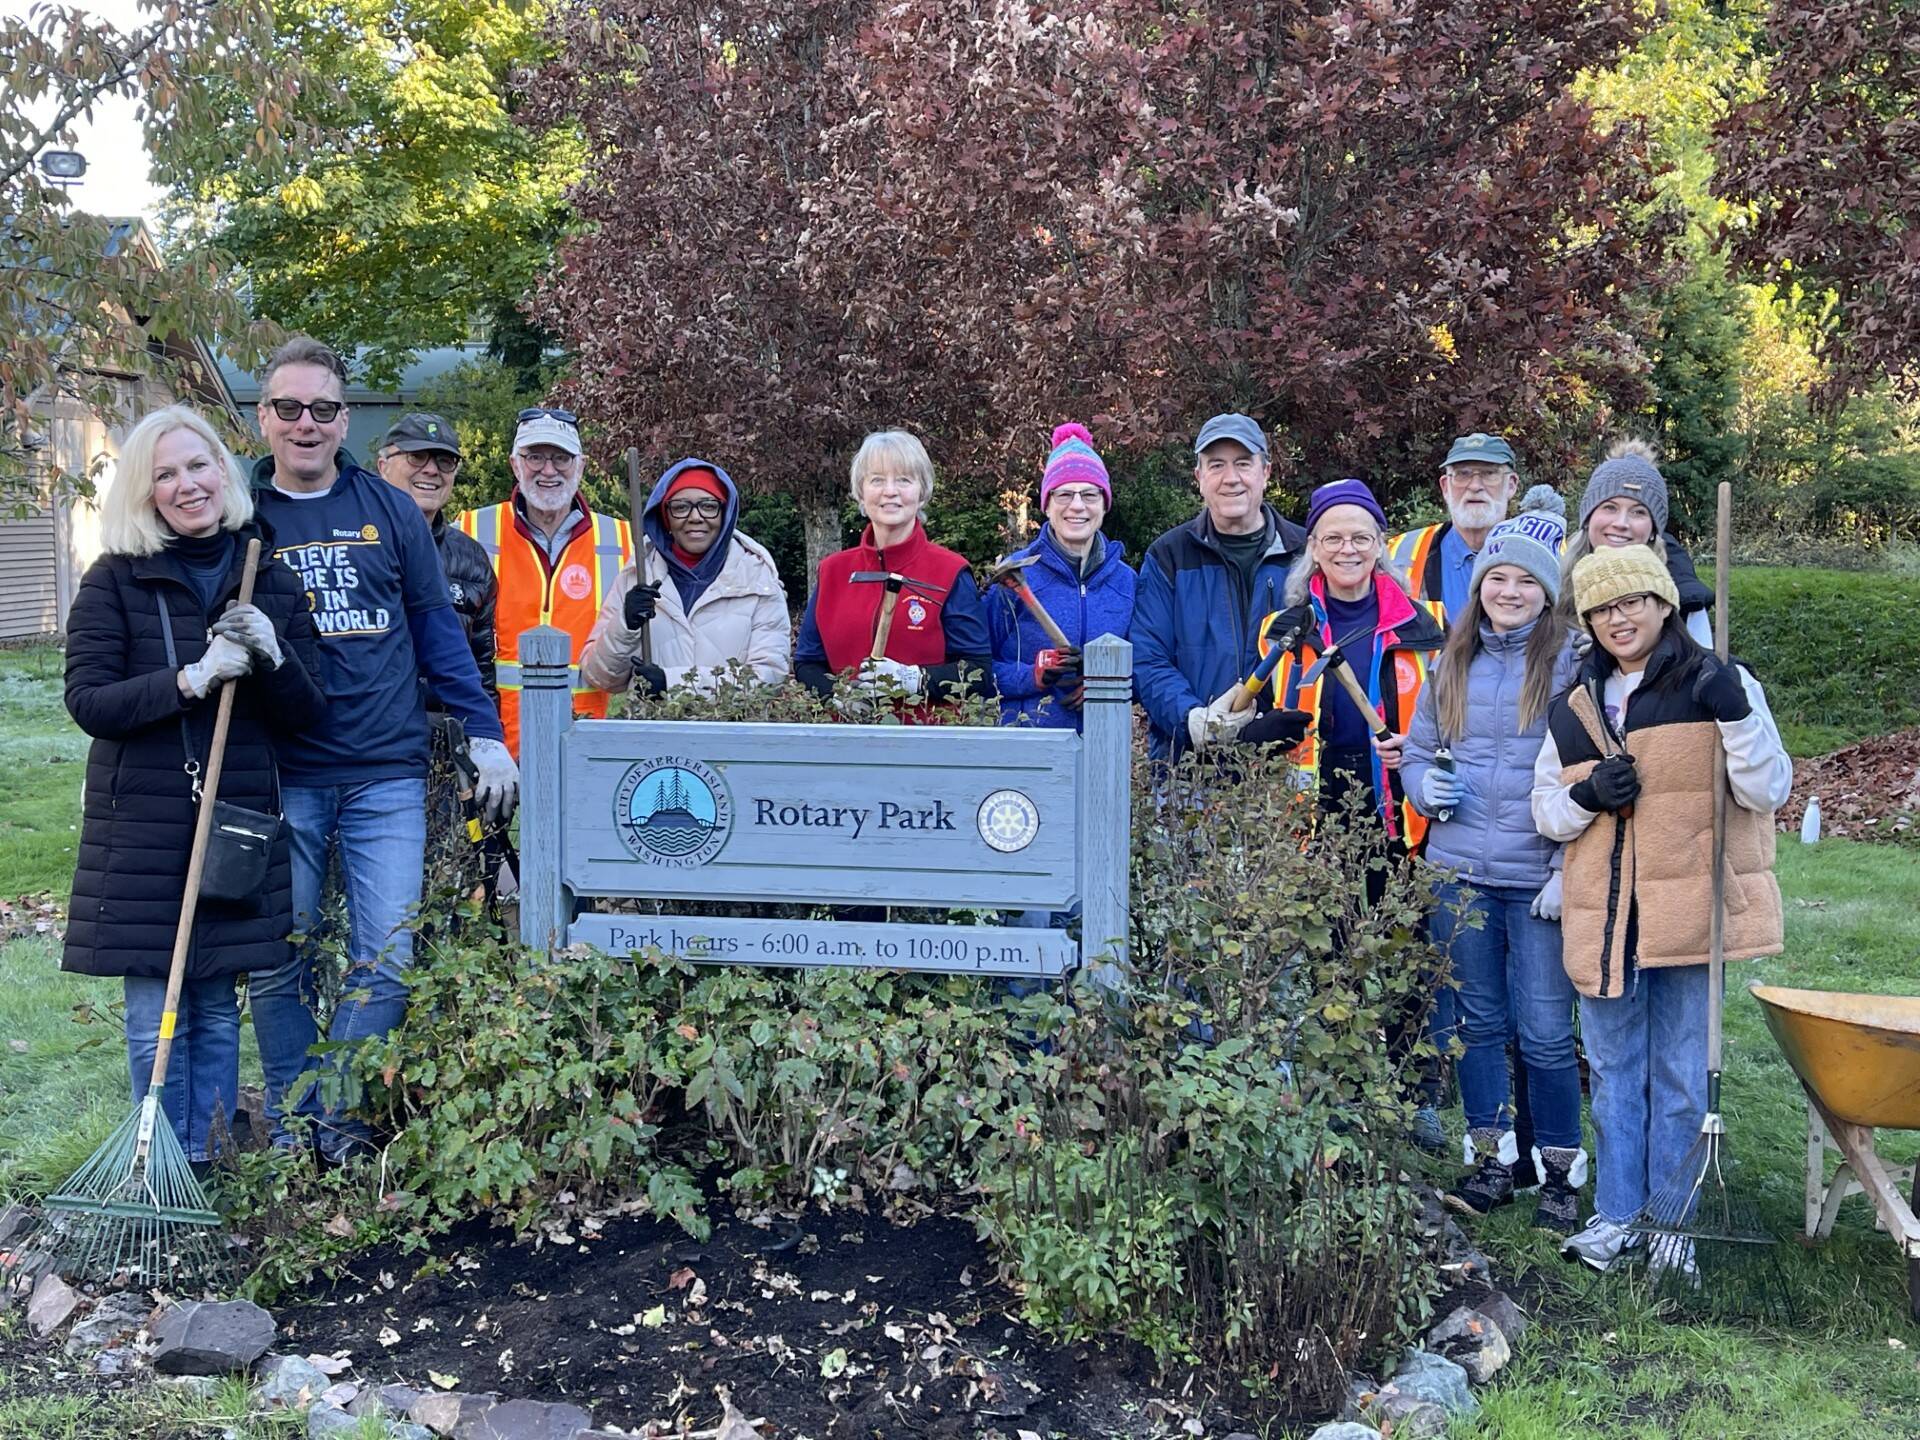 Rotary Club of Mercer Island members spent three hours on Oct. 28 cleaning up Rotary Park. They raked leaves, pulled weeds, trimmed blackberries and removed ivy. The club has adopted the park over the years and helped the city maintain it. Courtesy photo